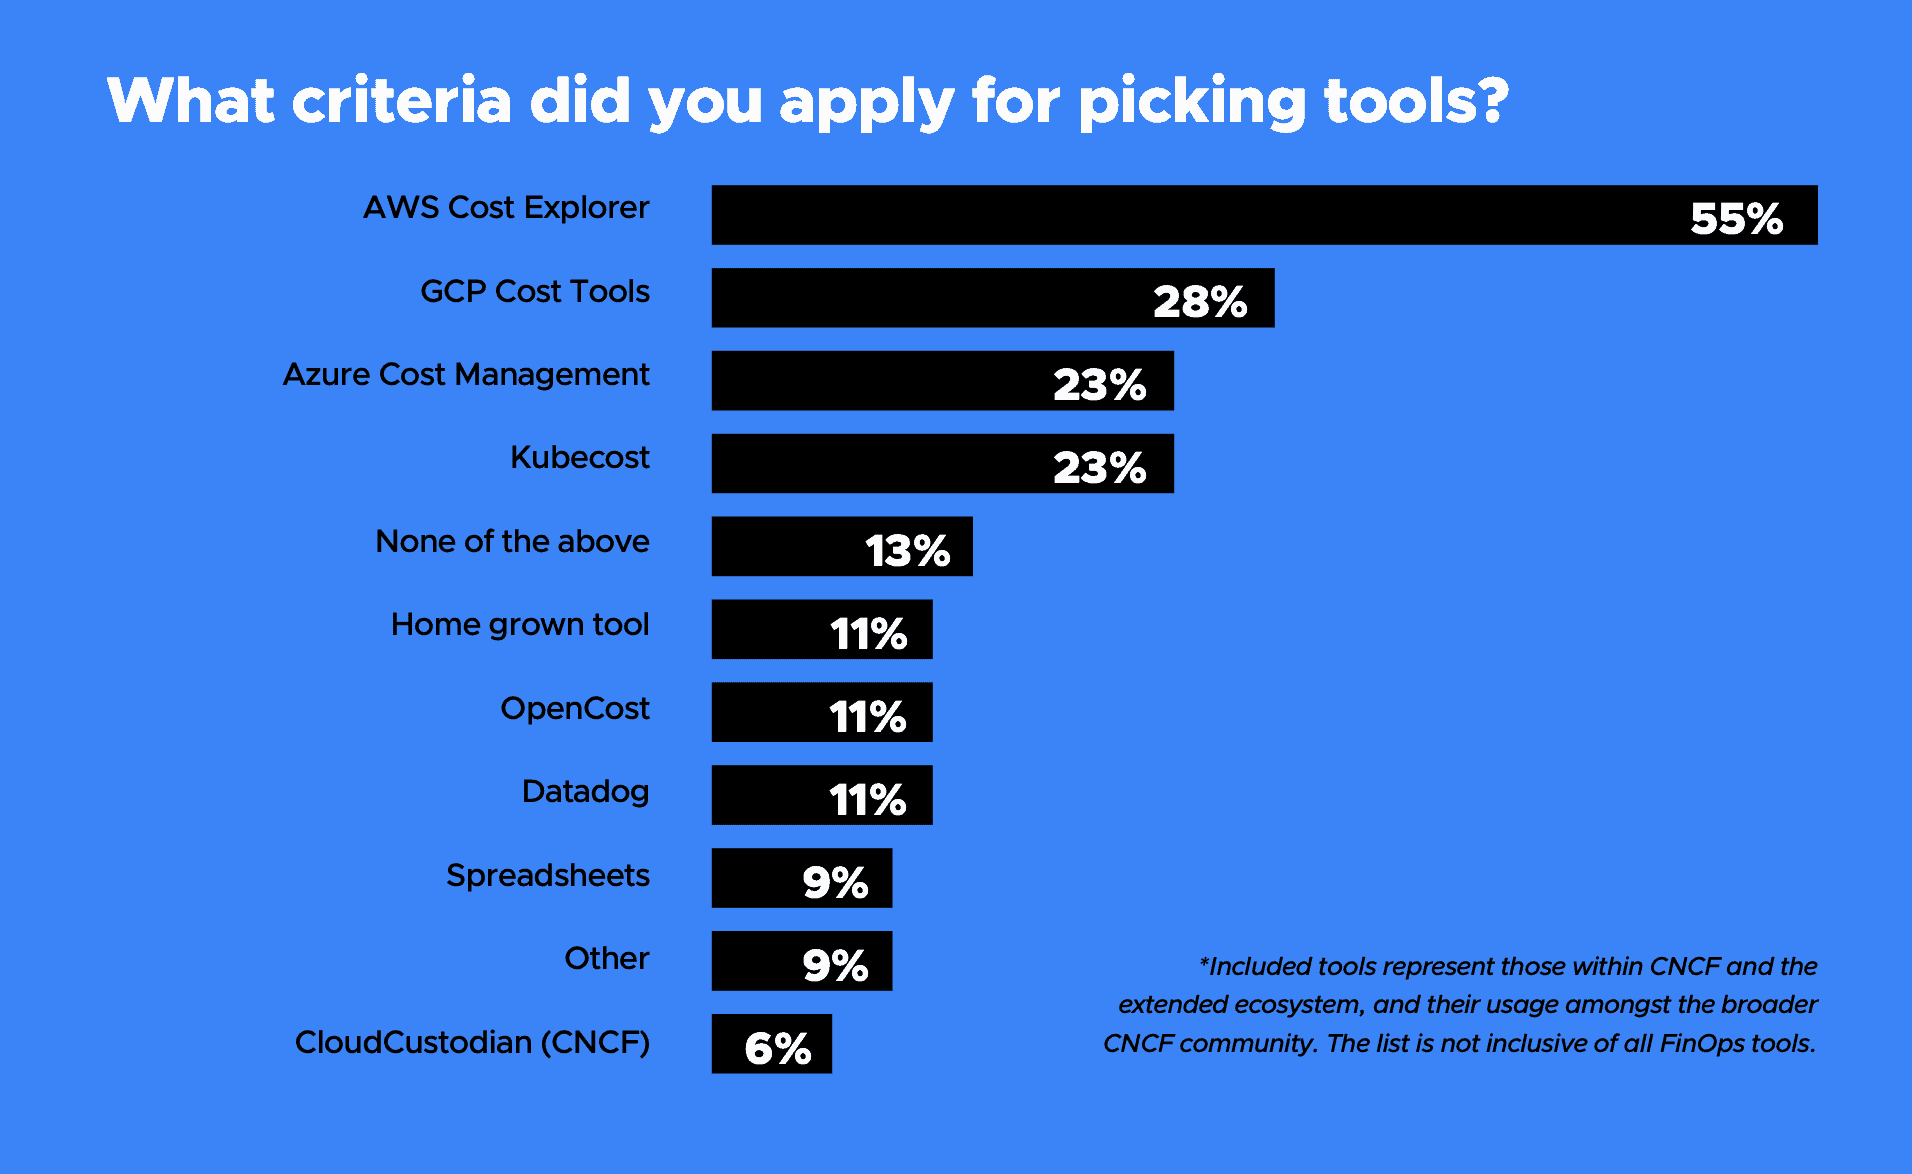 Bar chart showing respondent's answers for "What criteria did you apply for picking tools?" 55% of the respondents chose AWS Cost Explorer